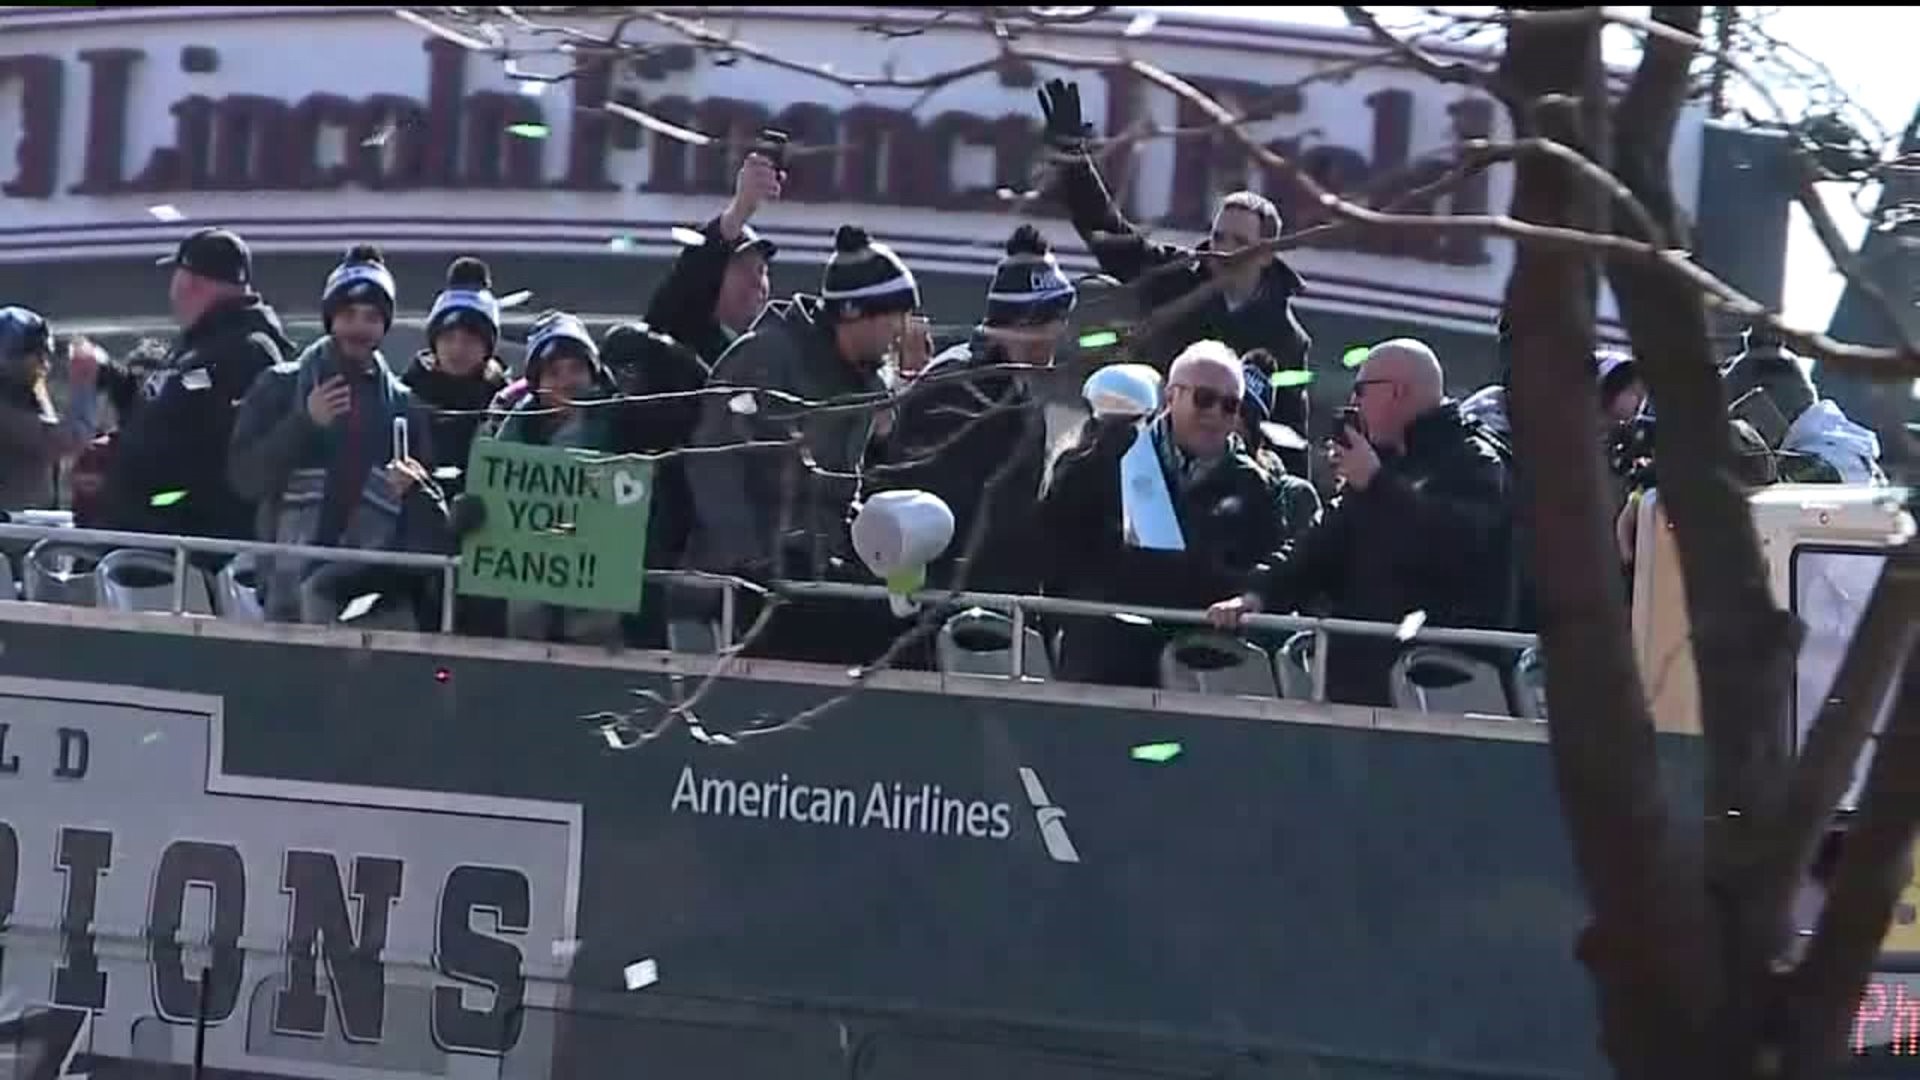 Eagles Fans Hit the Road for Victory Parade in Philadelphia